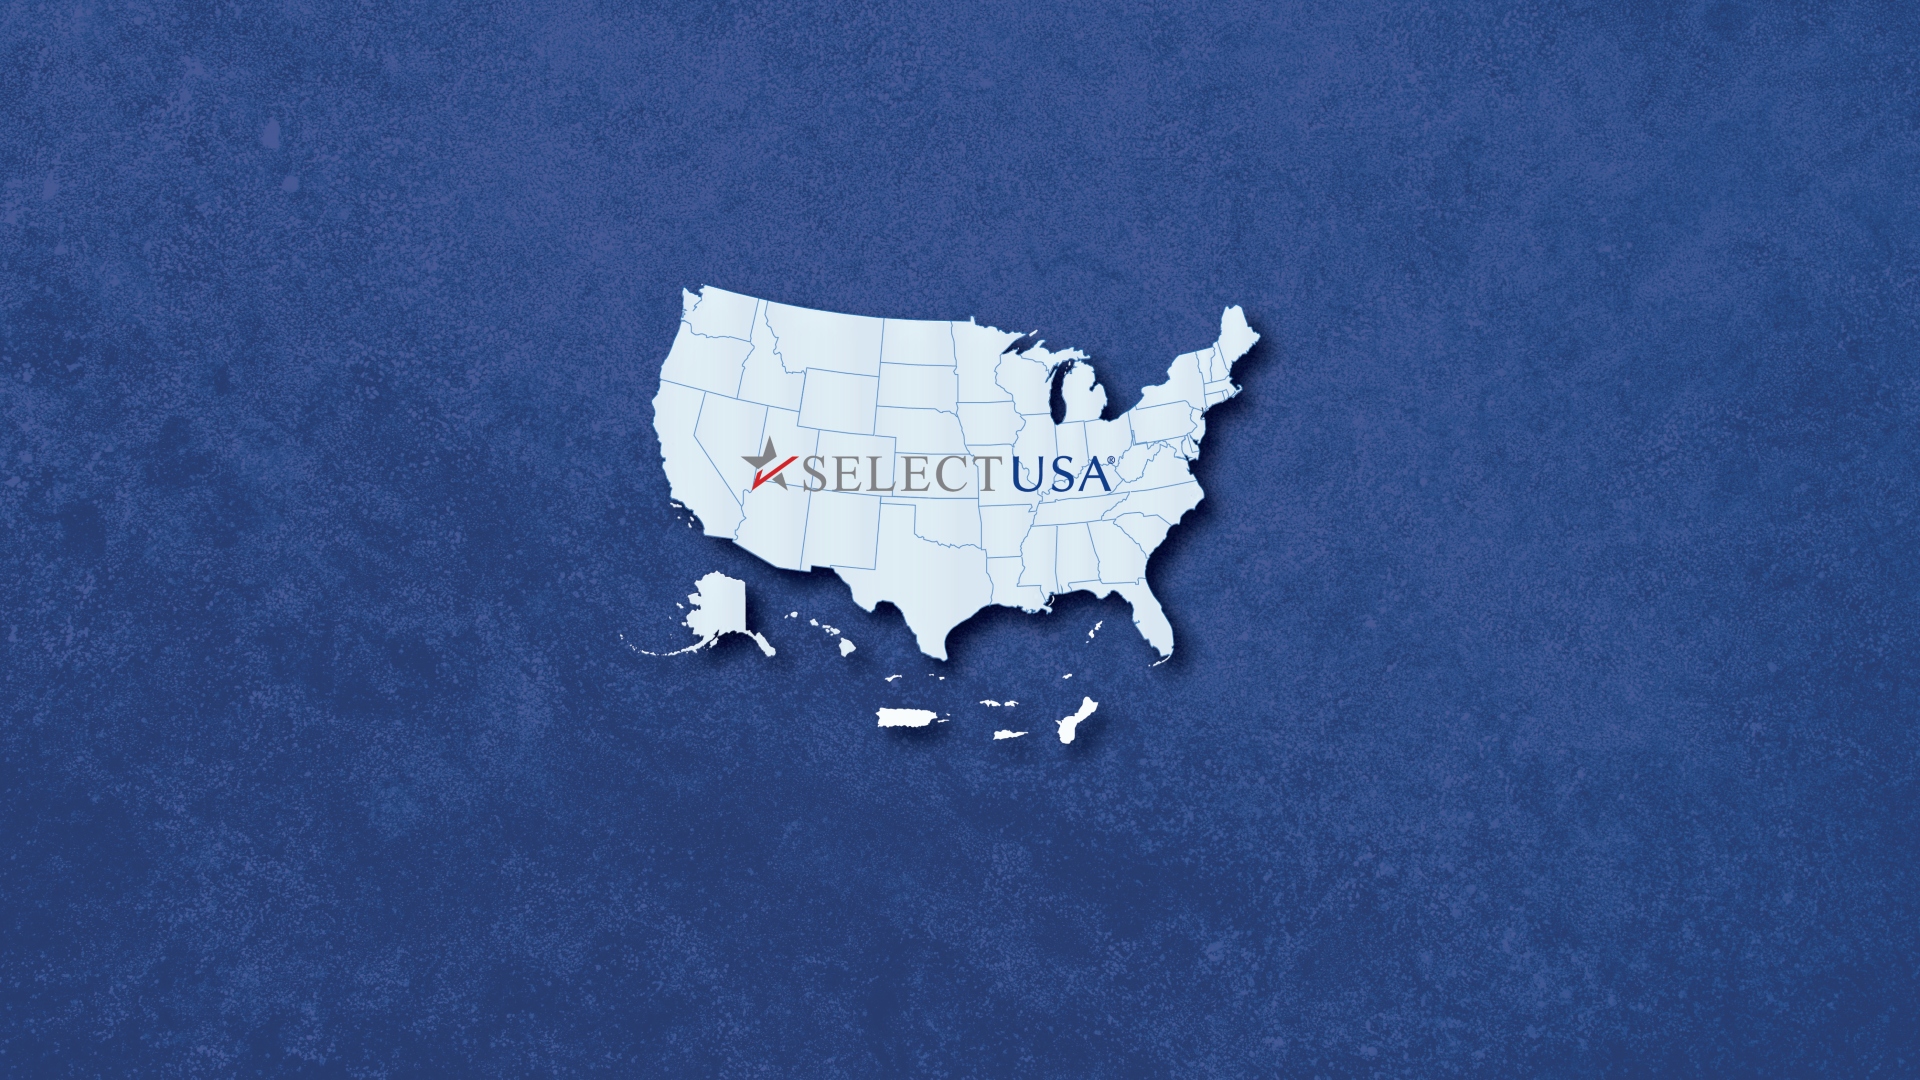 Outline of the United States with the SelectUSA Logo in the center.